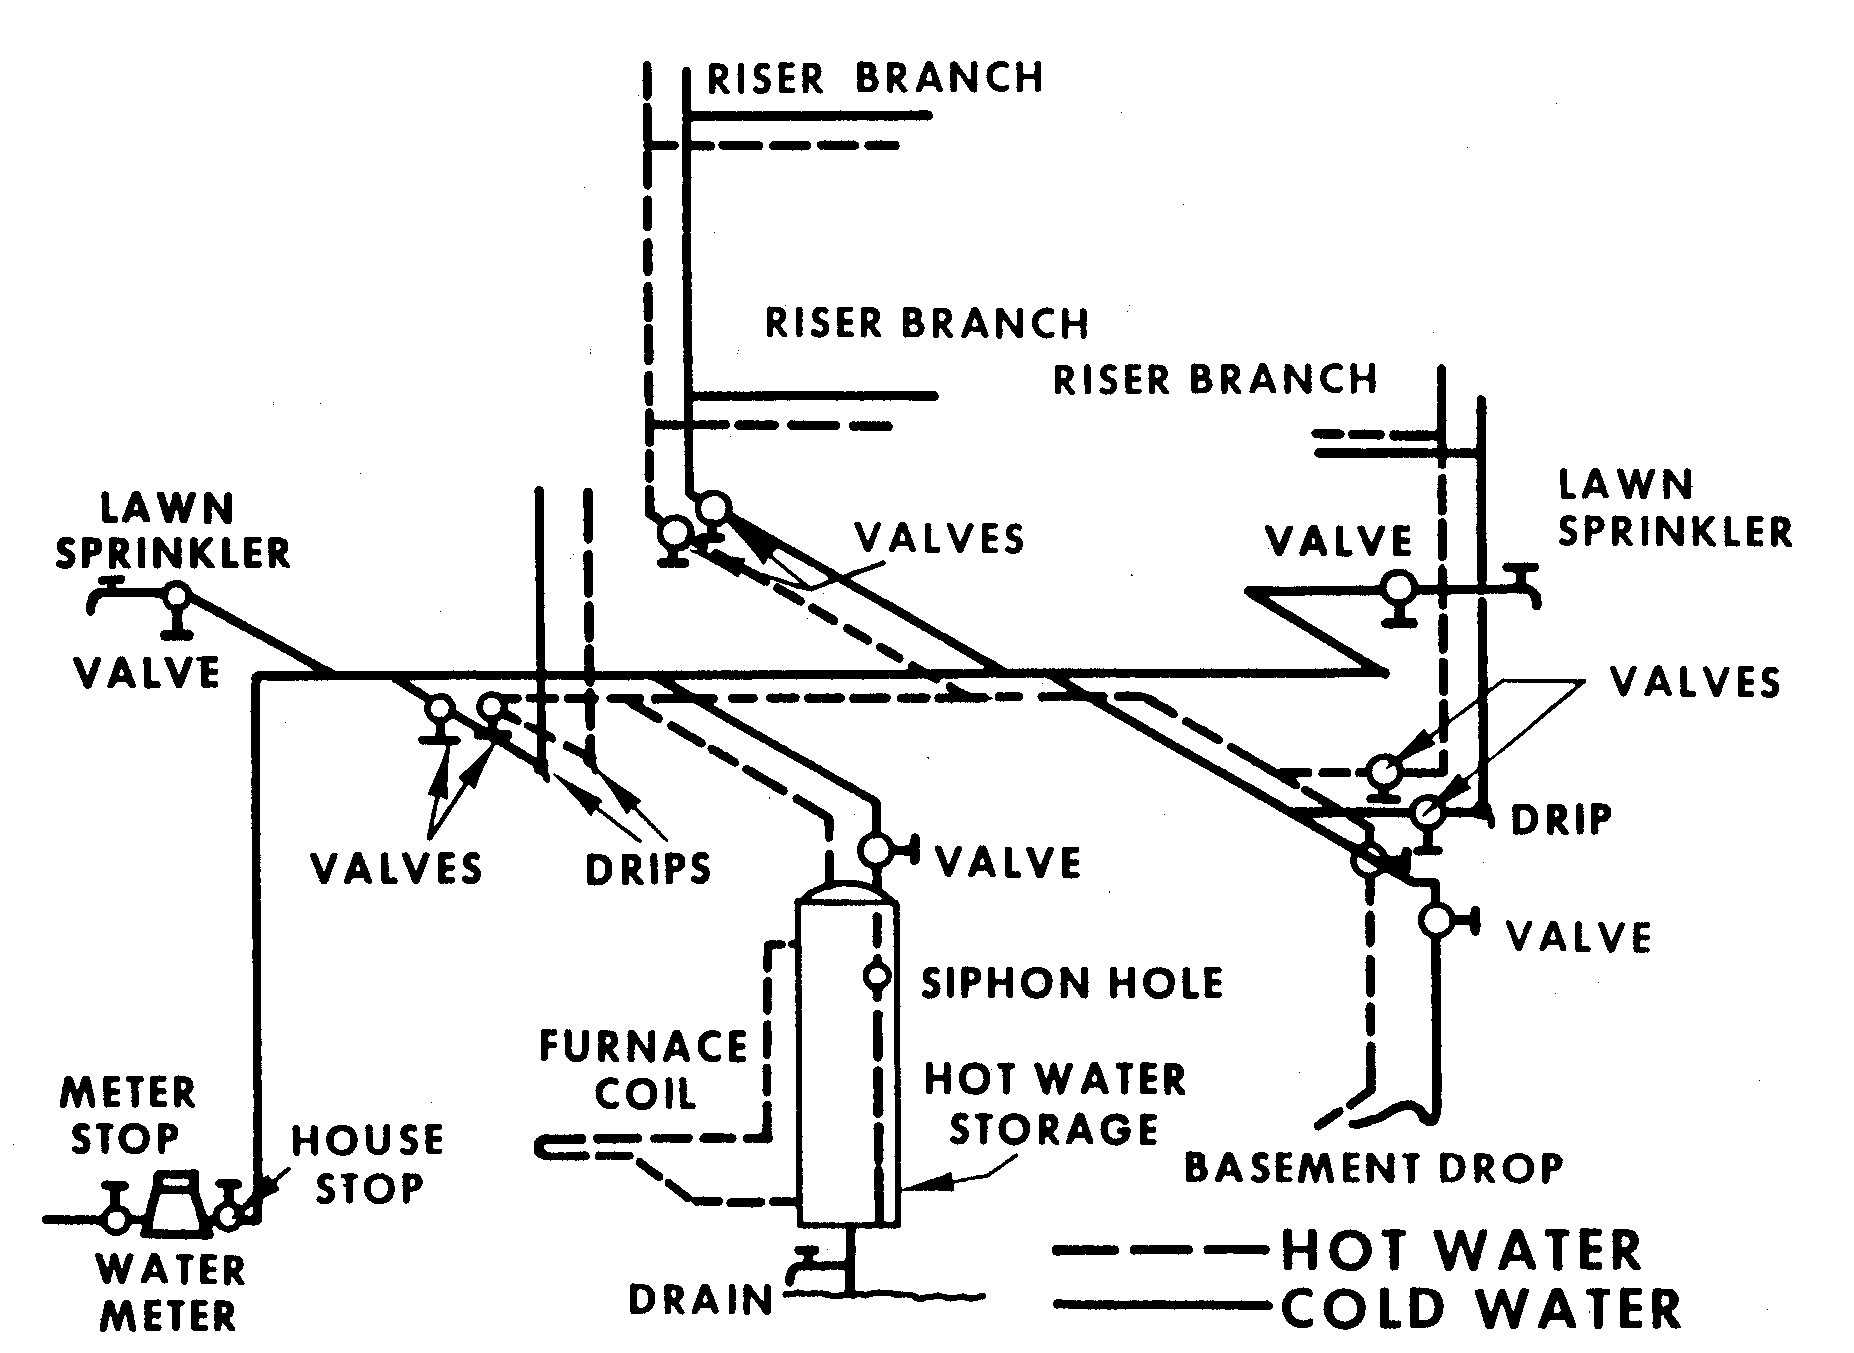 Figure 9.1. Typical Home Water System